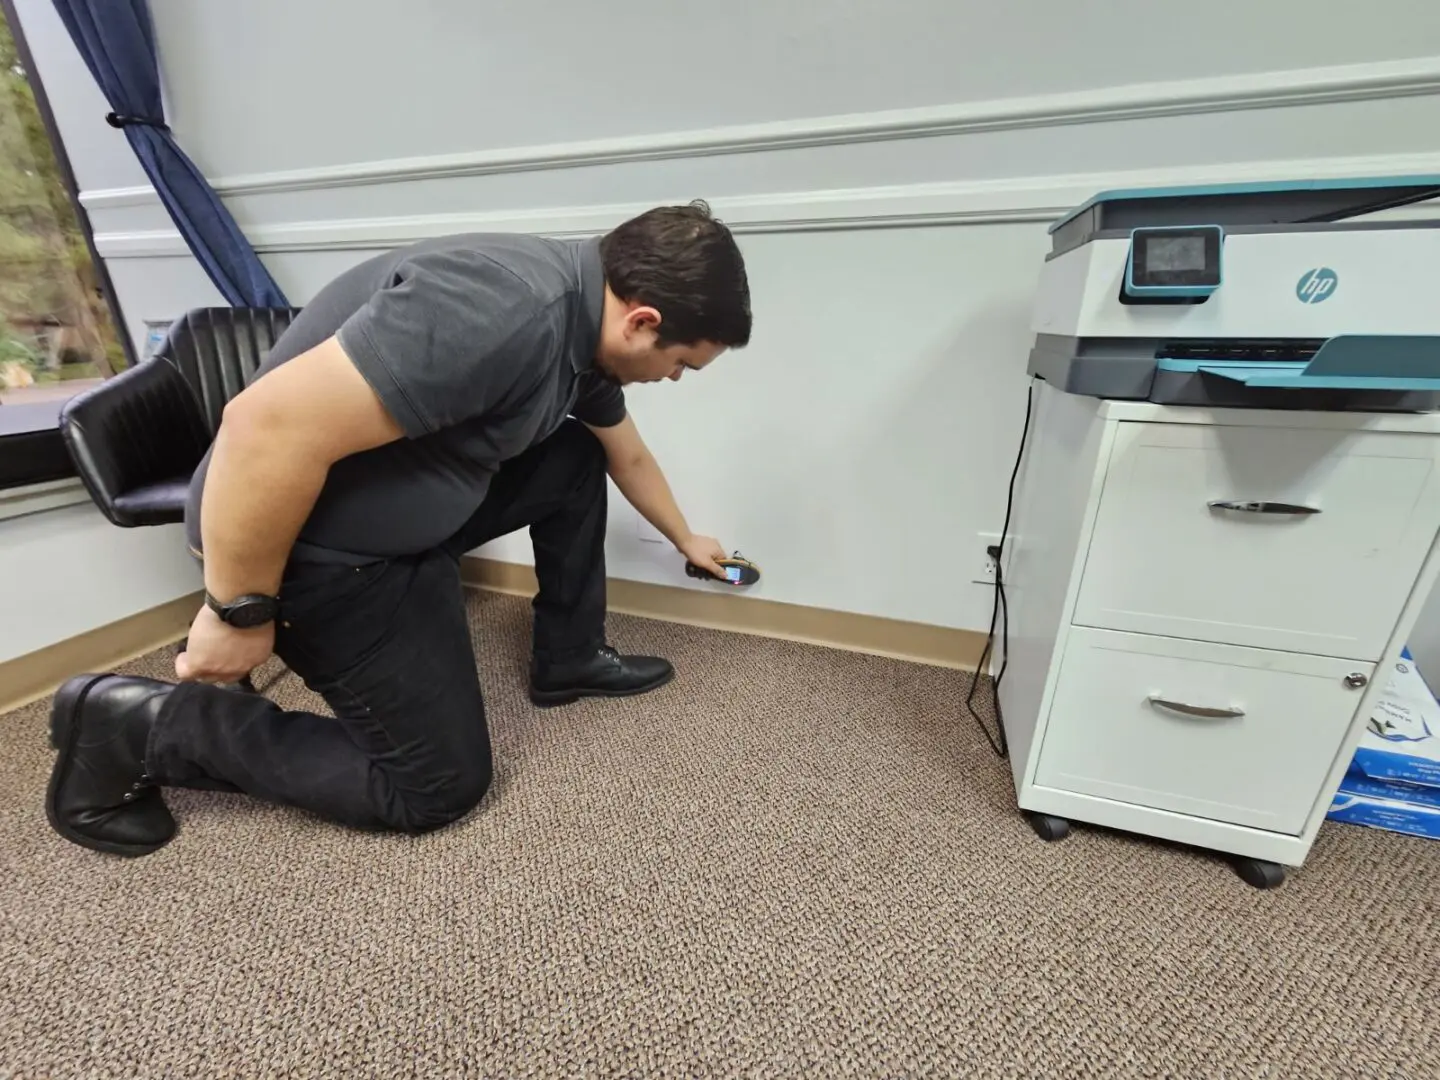 A man kneeling down on the floor in front of a printer.